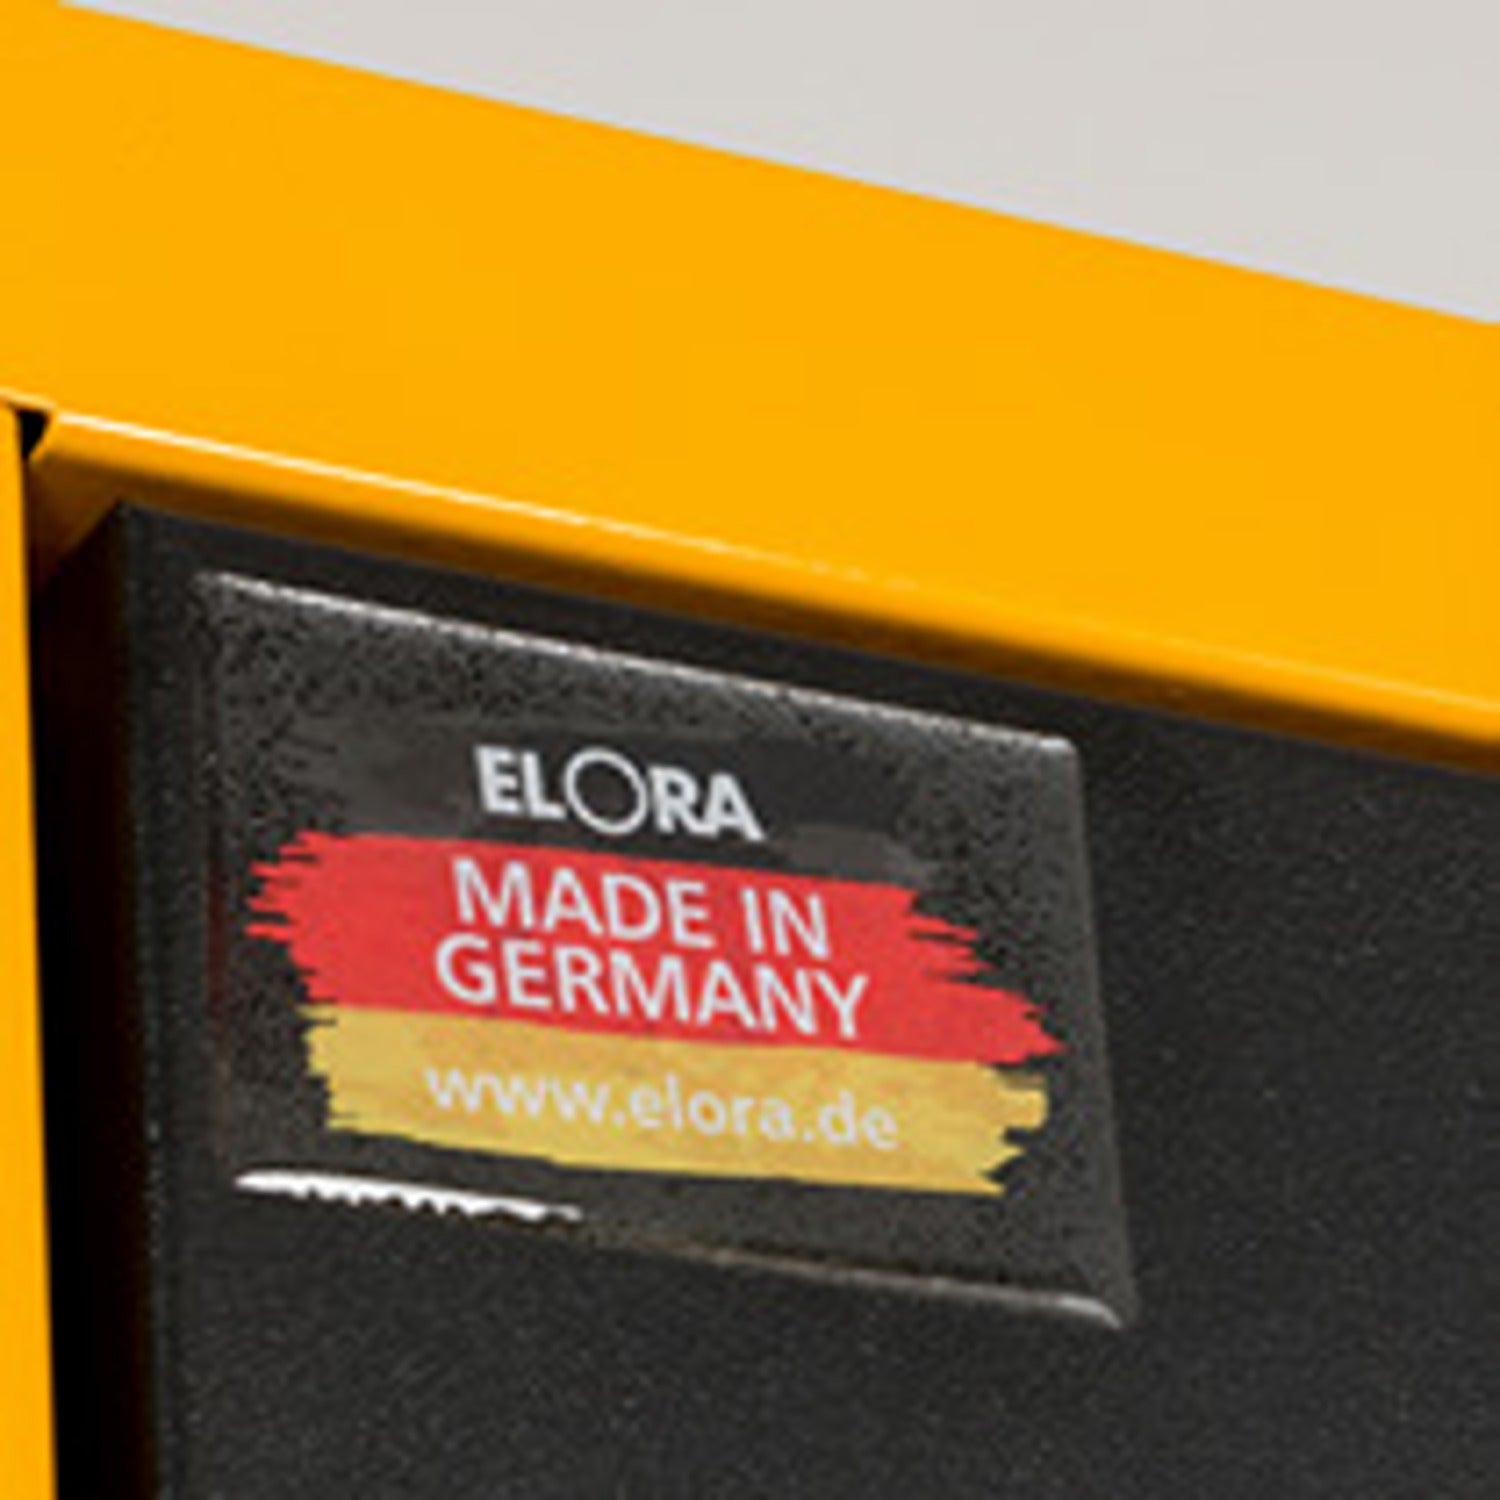 ELORA 1220-L7 Roller Tool Cabinet Super Caddy (ELORA Tools) - Premium Roller Tool Cabinet from ELORA - Shop now at Yew Aik.